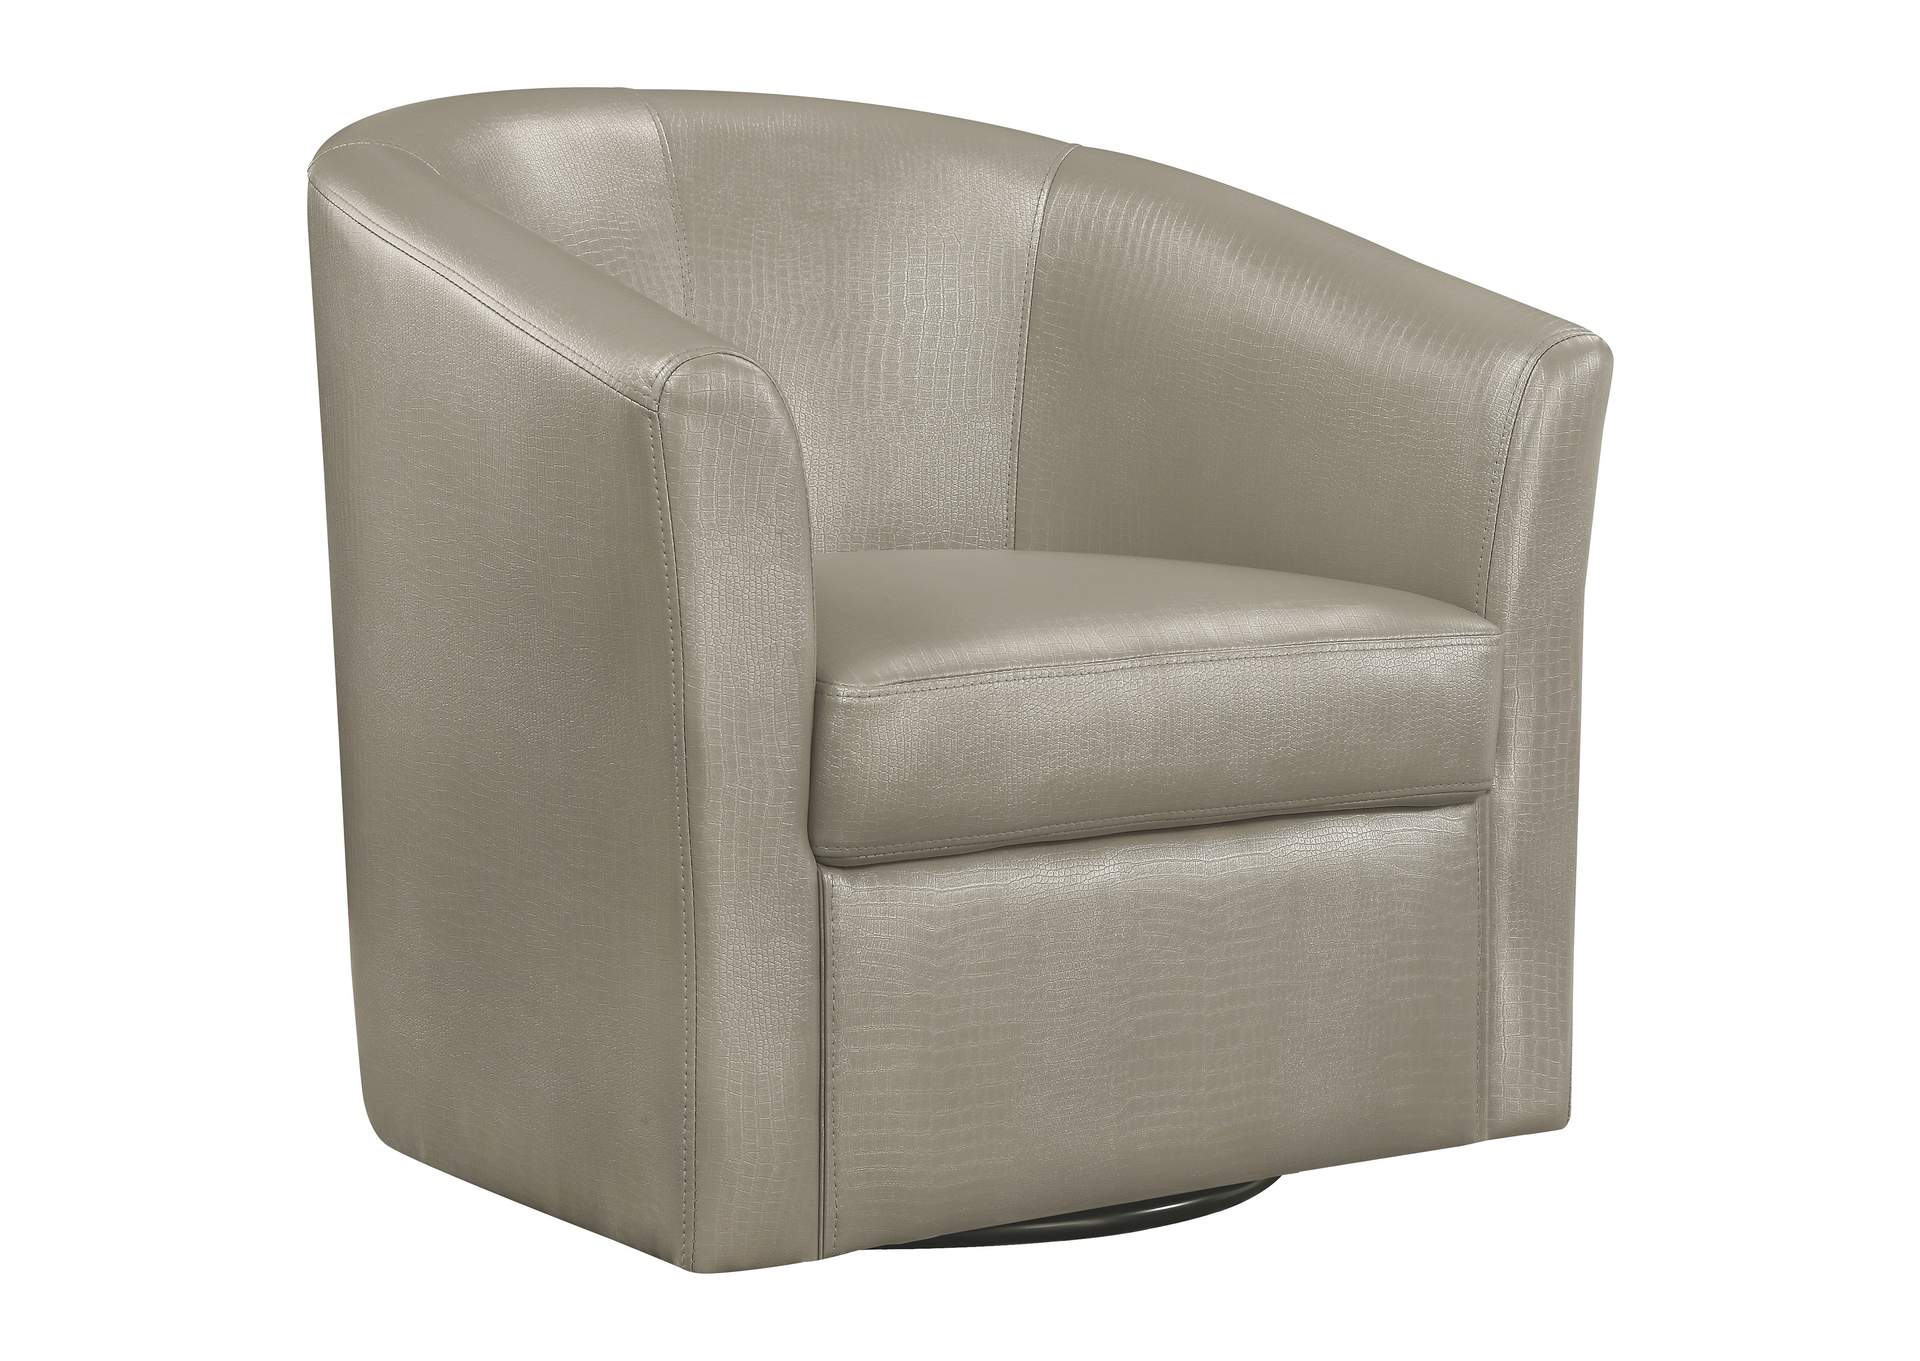 Turner Upholstery Sloped Arm Accent Swivel Chair Champagne,Coaster Furniture